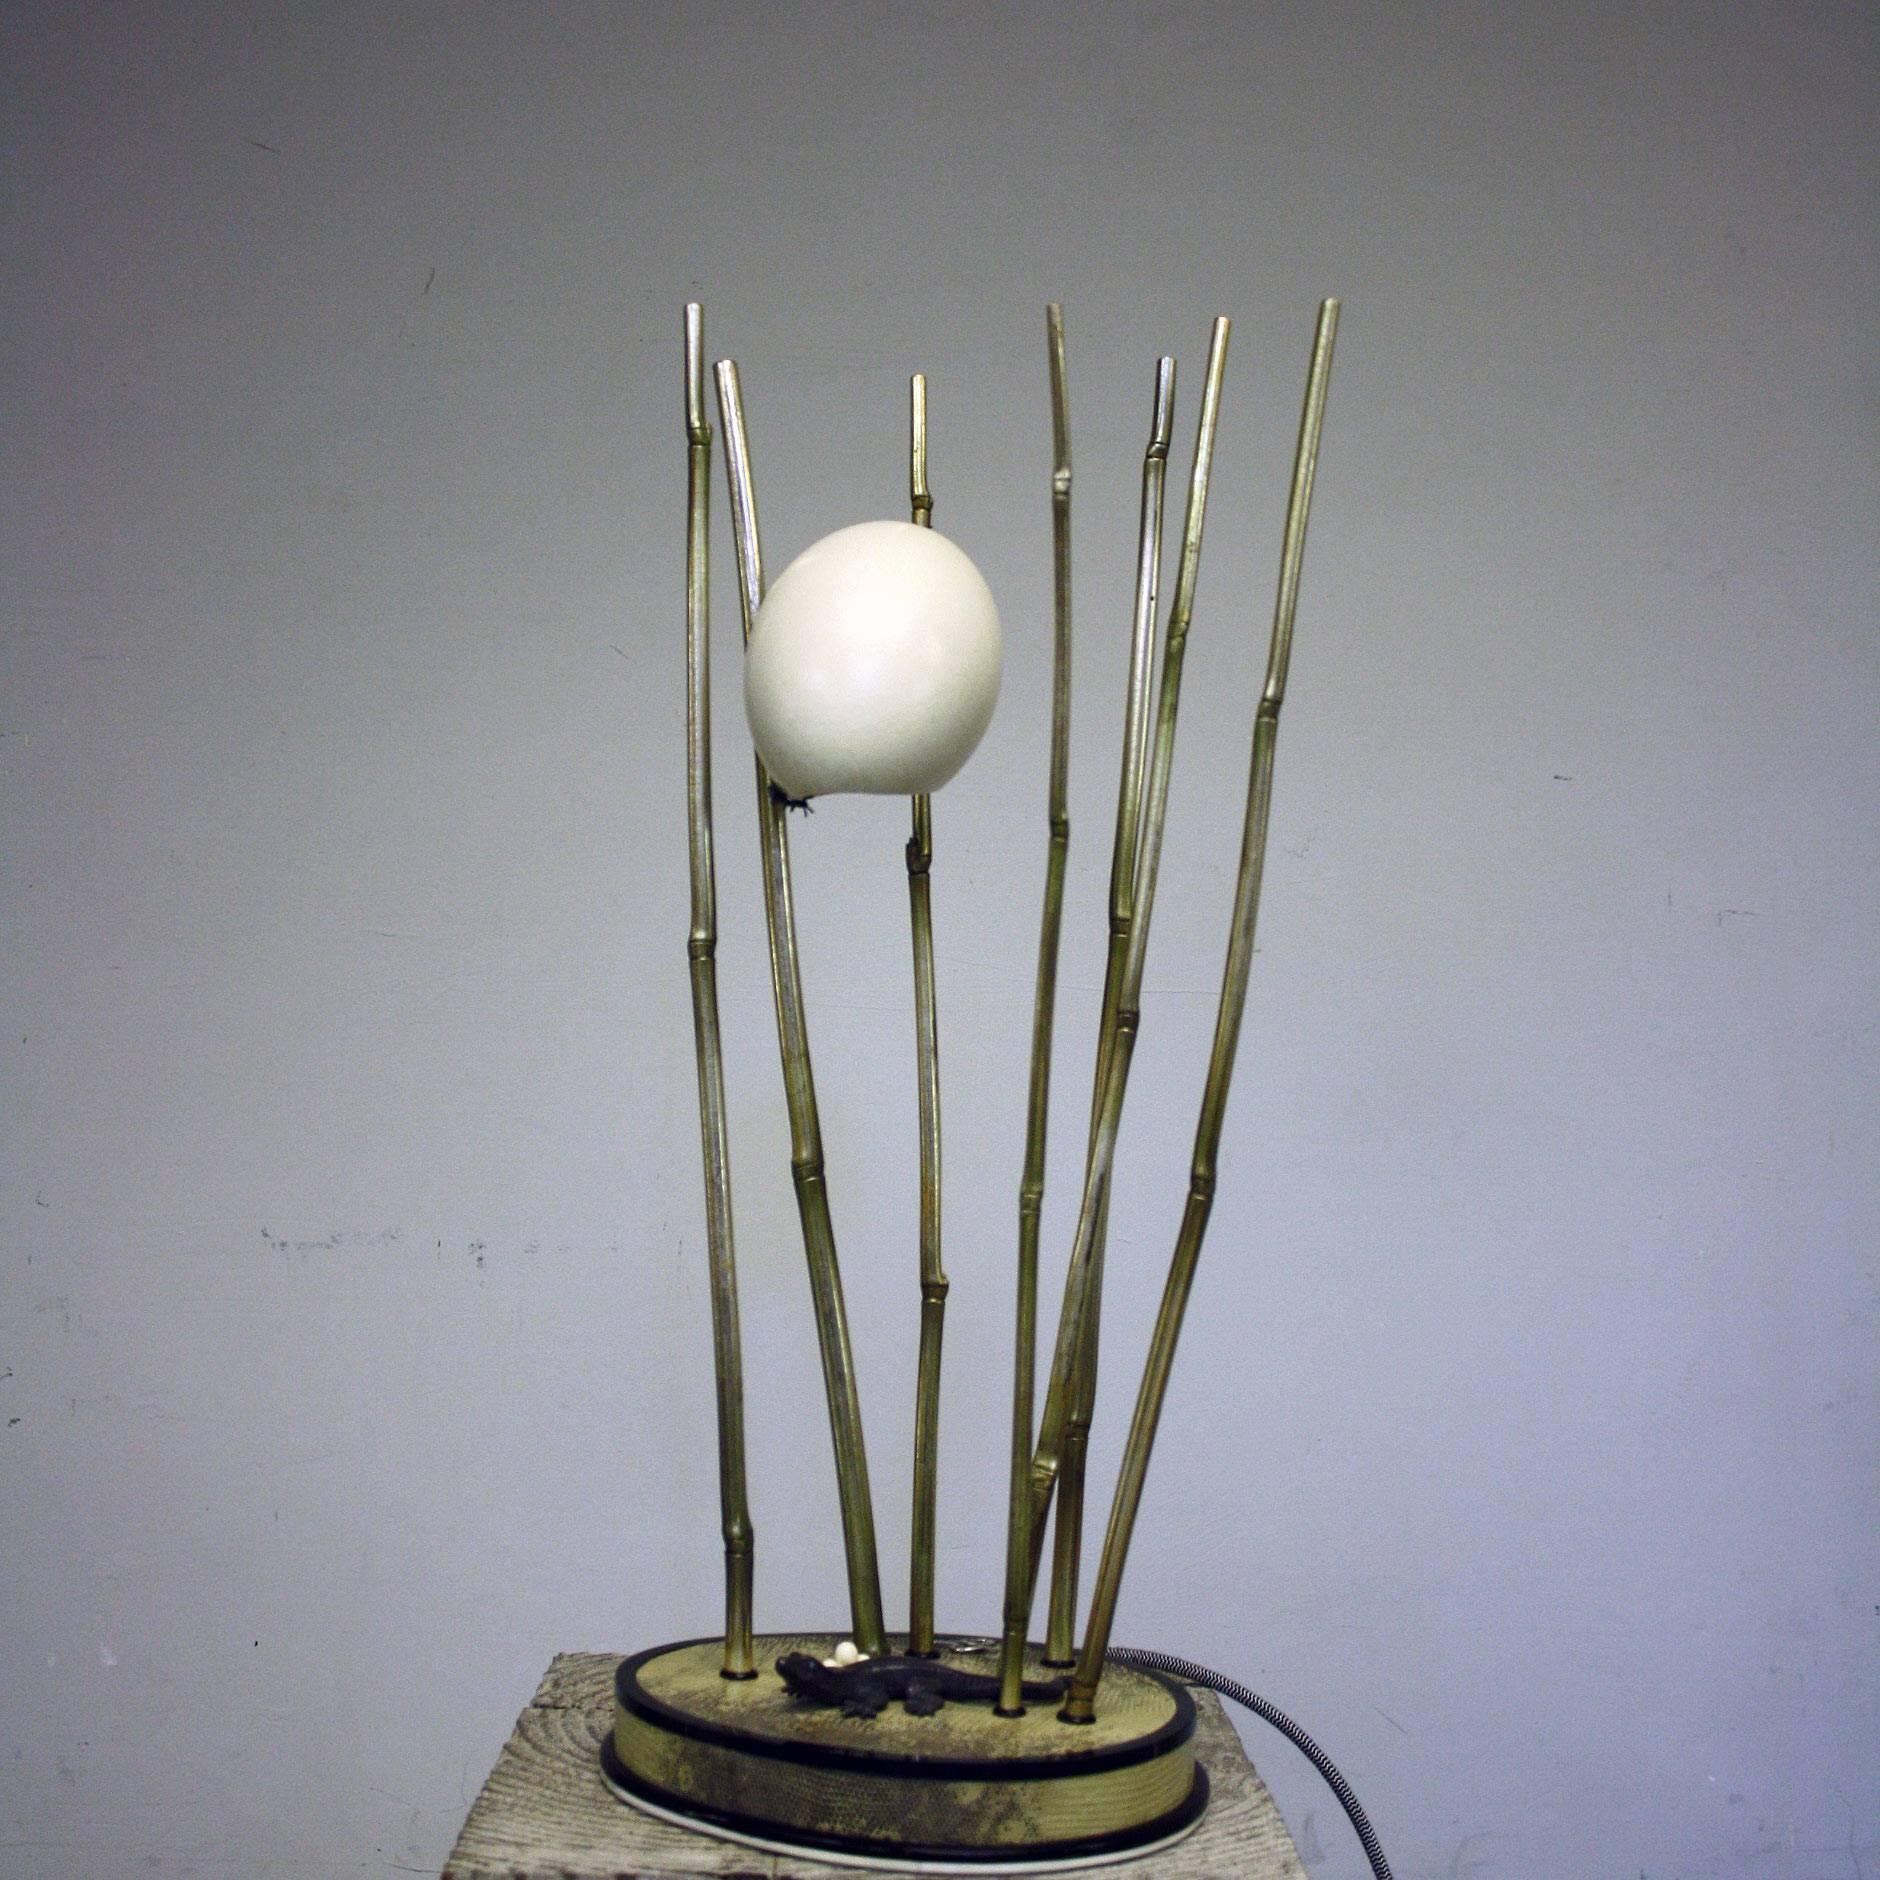 A Rhea egg lamp by Glyn Lockett, with silvered brass bamboo, bronze lizard and bone eggs on buffalo horn and monitor lizard veneered base with makers silver monogram, the egg applied with silver ants.

This is a fantastic opportunity to start